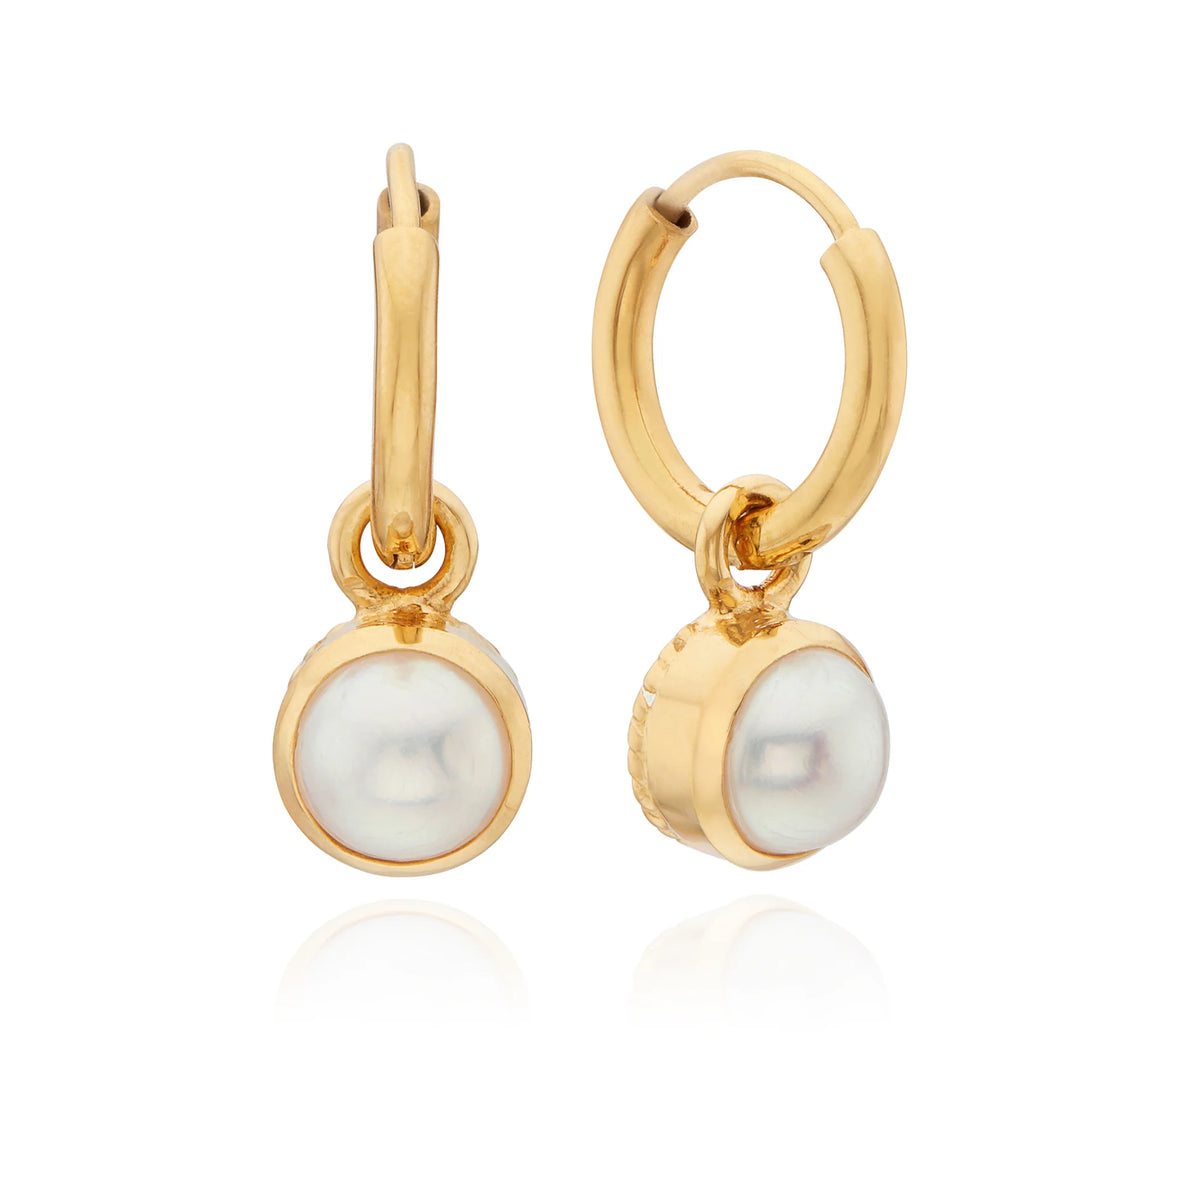 Gold hoops with reversible pearl or gold dotted pendant